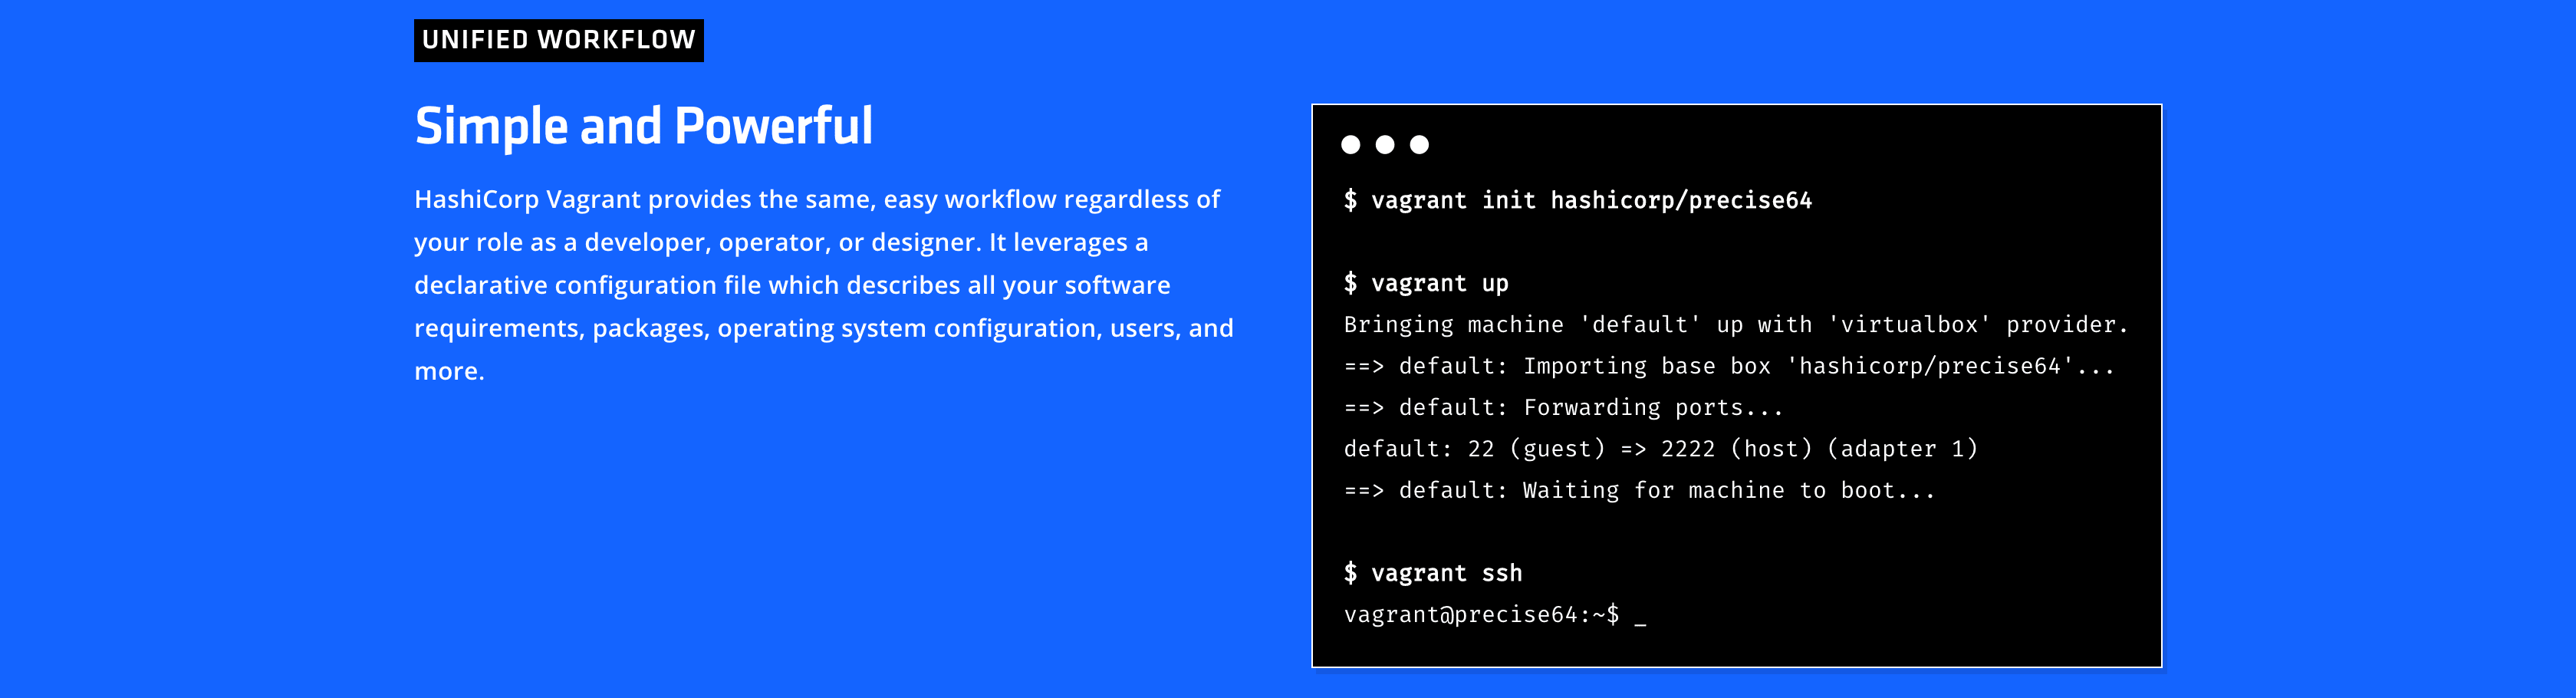 The Vagrant website.